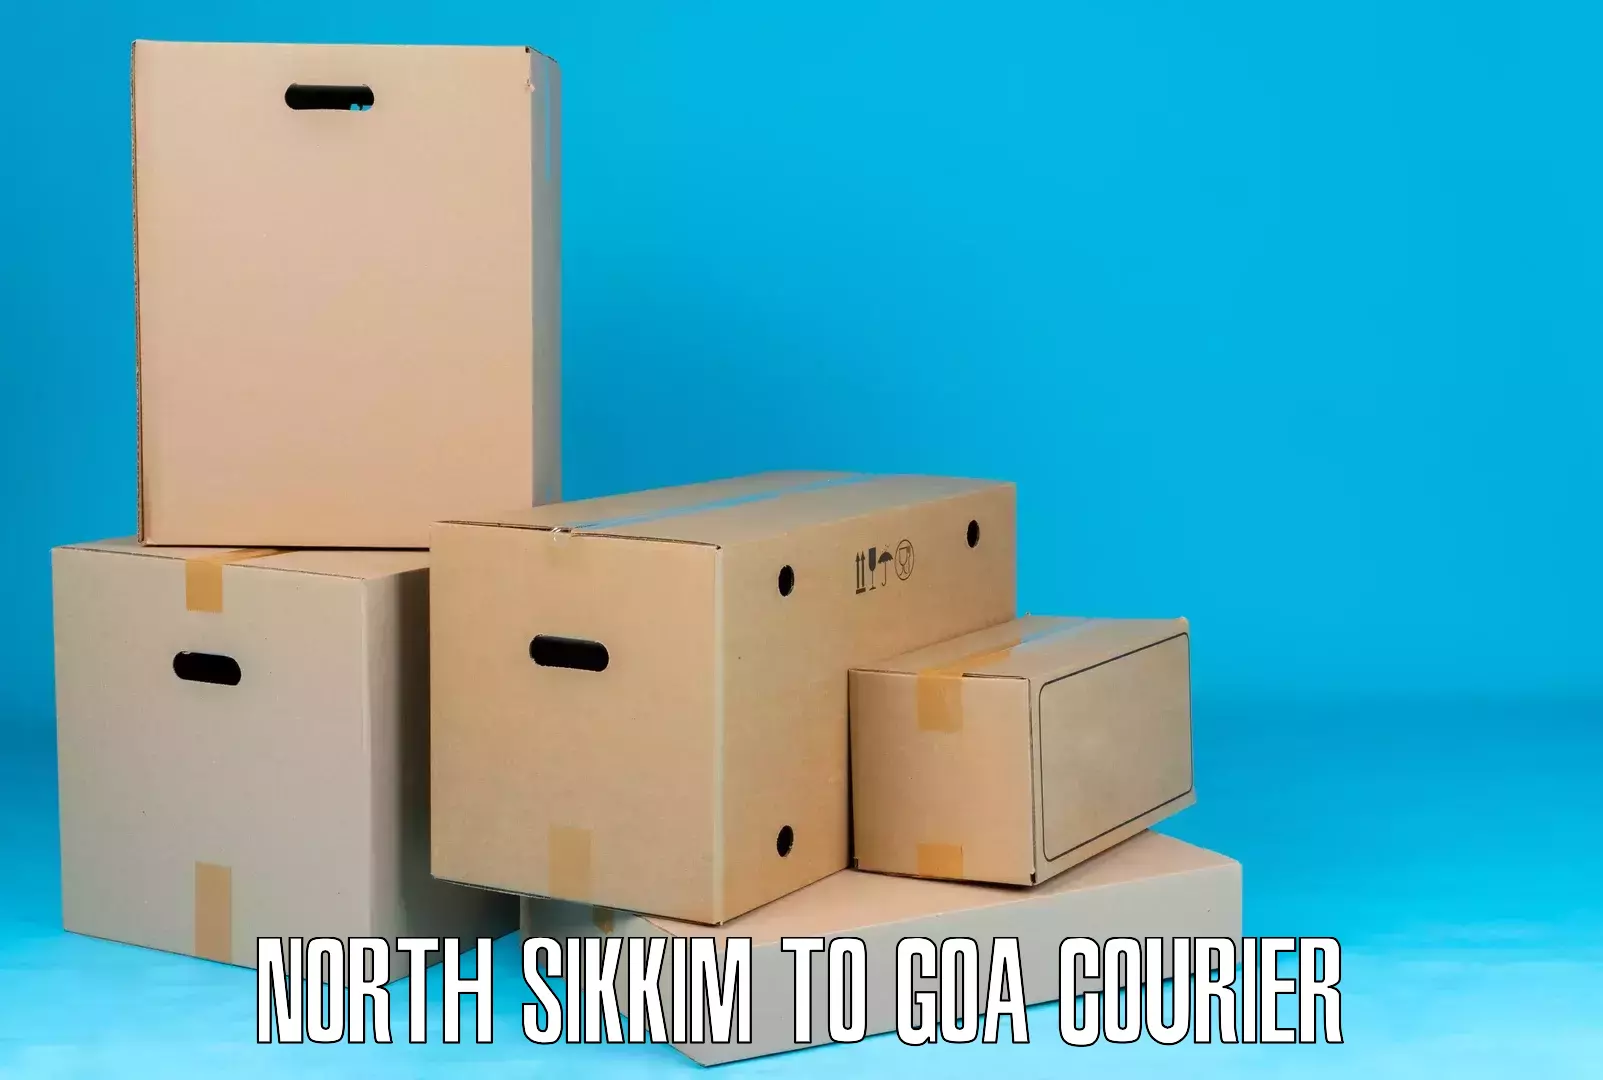 Modern delivery technologies in North Sikkim to Goa